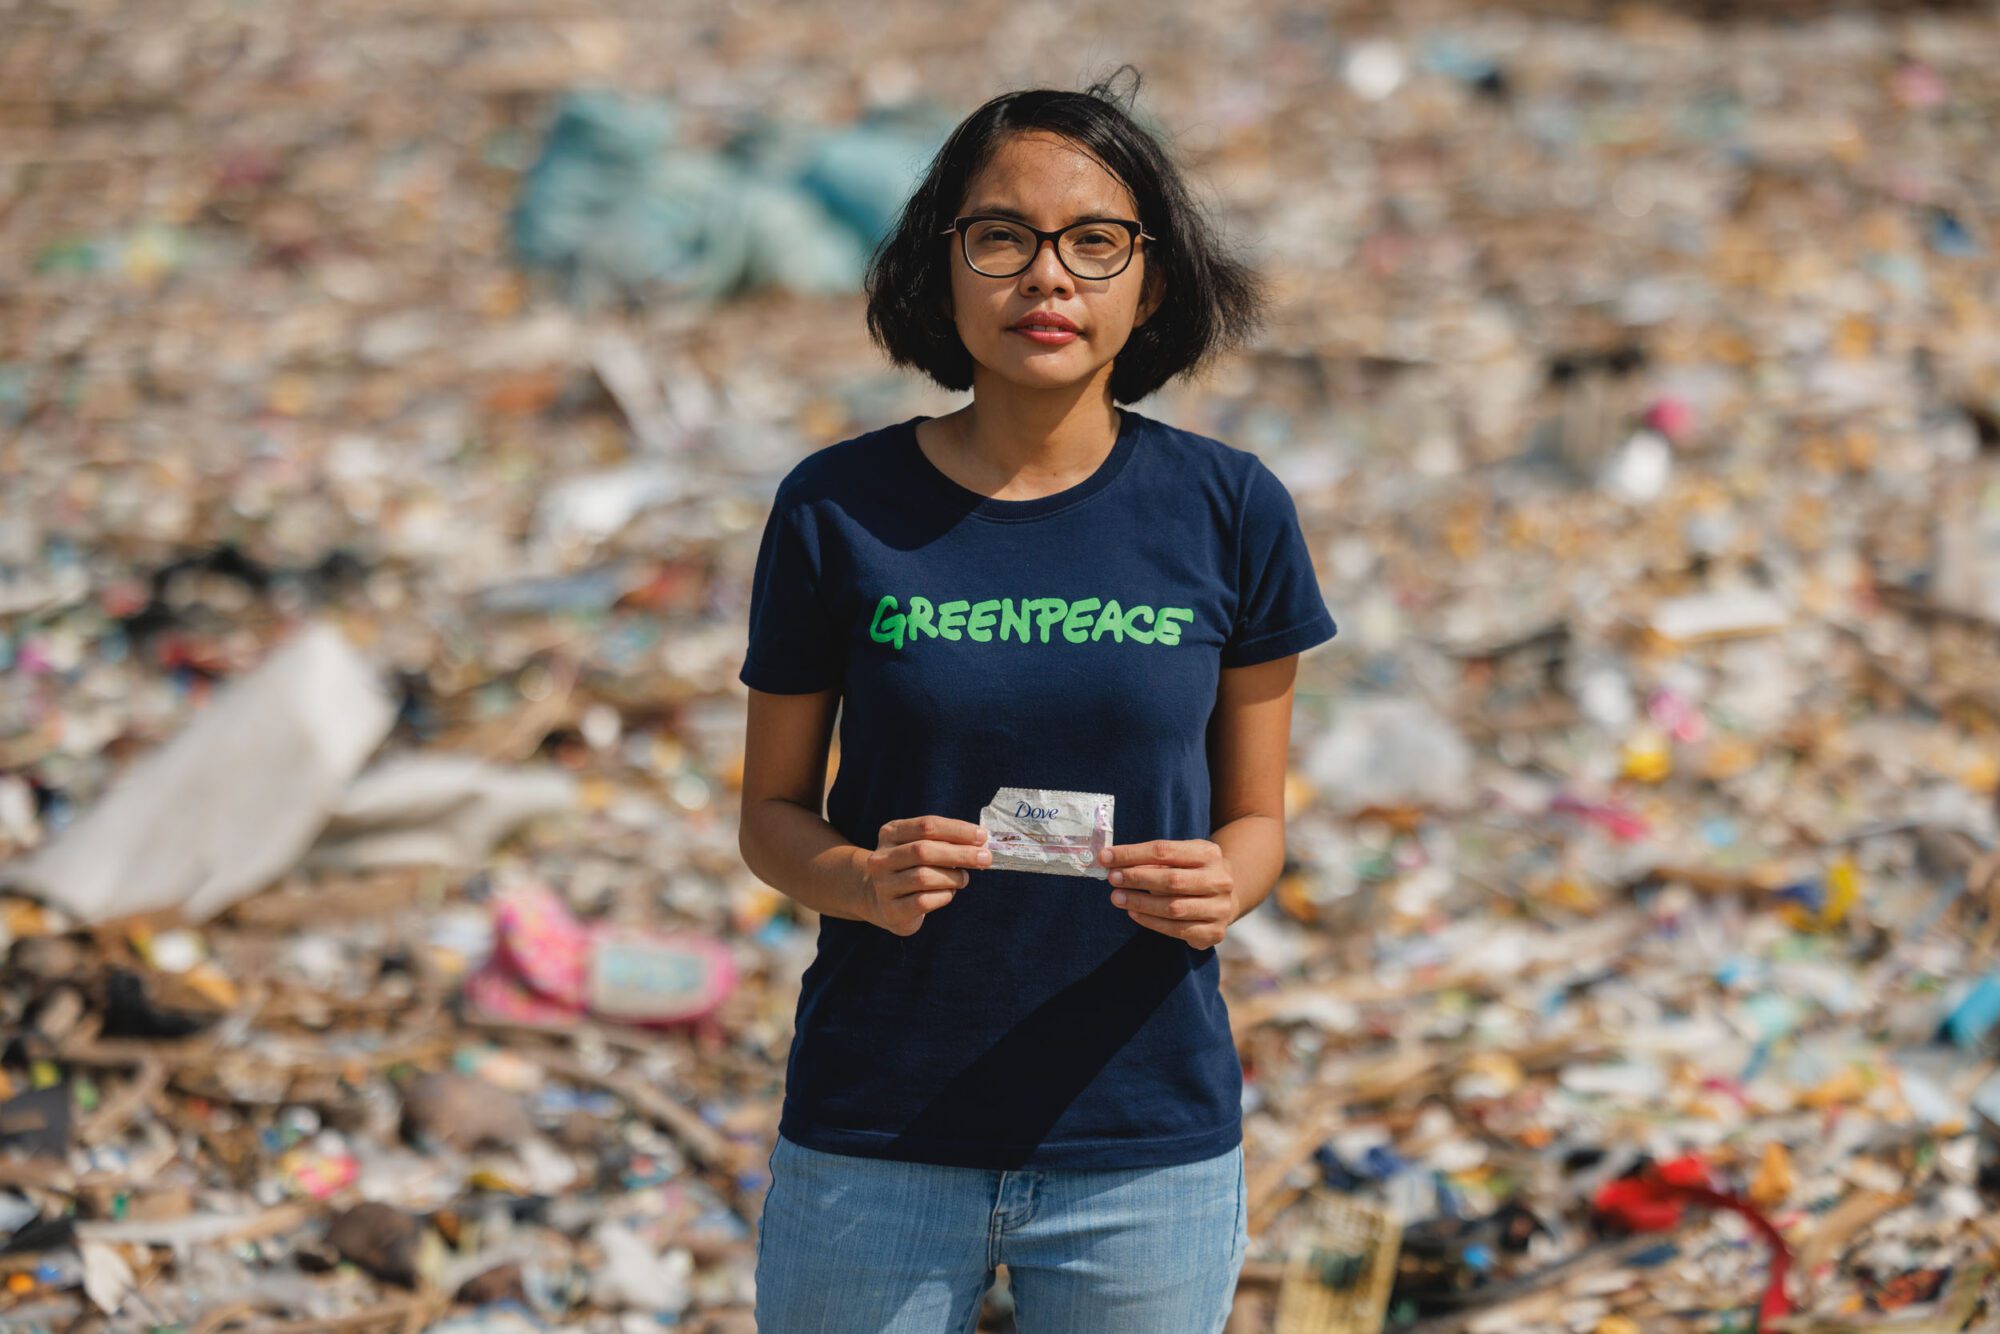 A woman in a Greenpeace t-shirt stands holding a small piece of plastic reading Dove against a background filled entirely with plastic waste